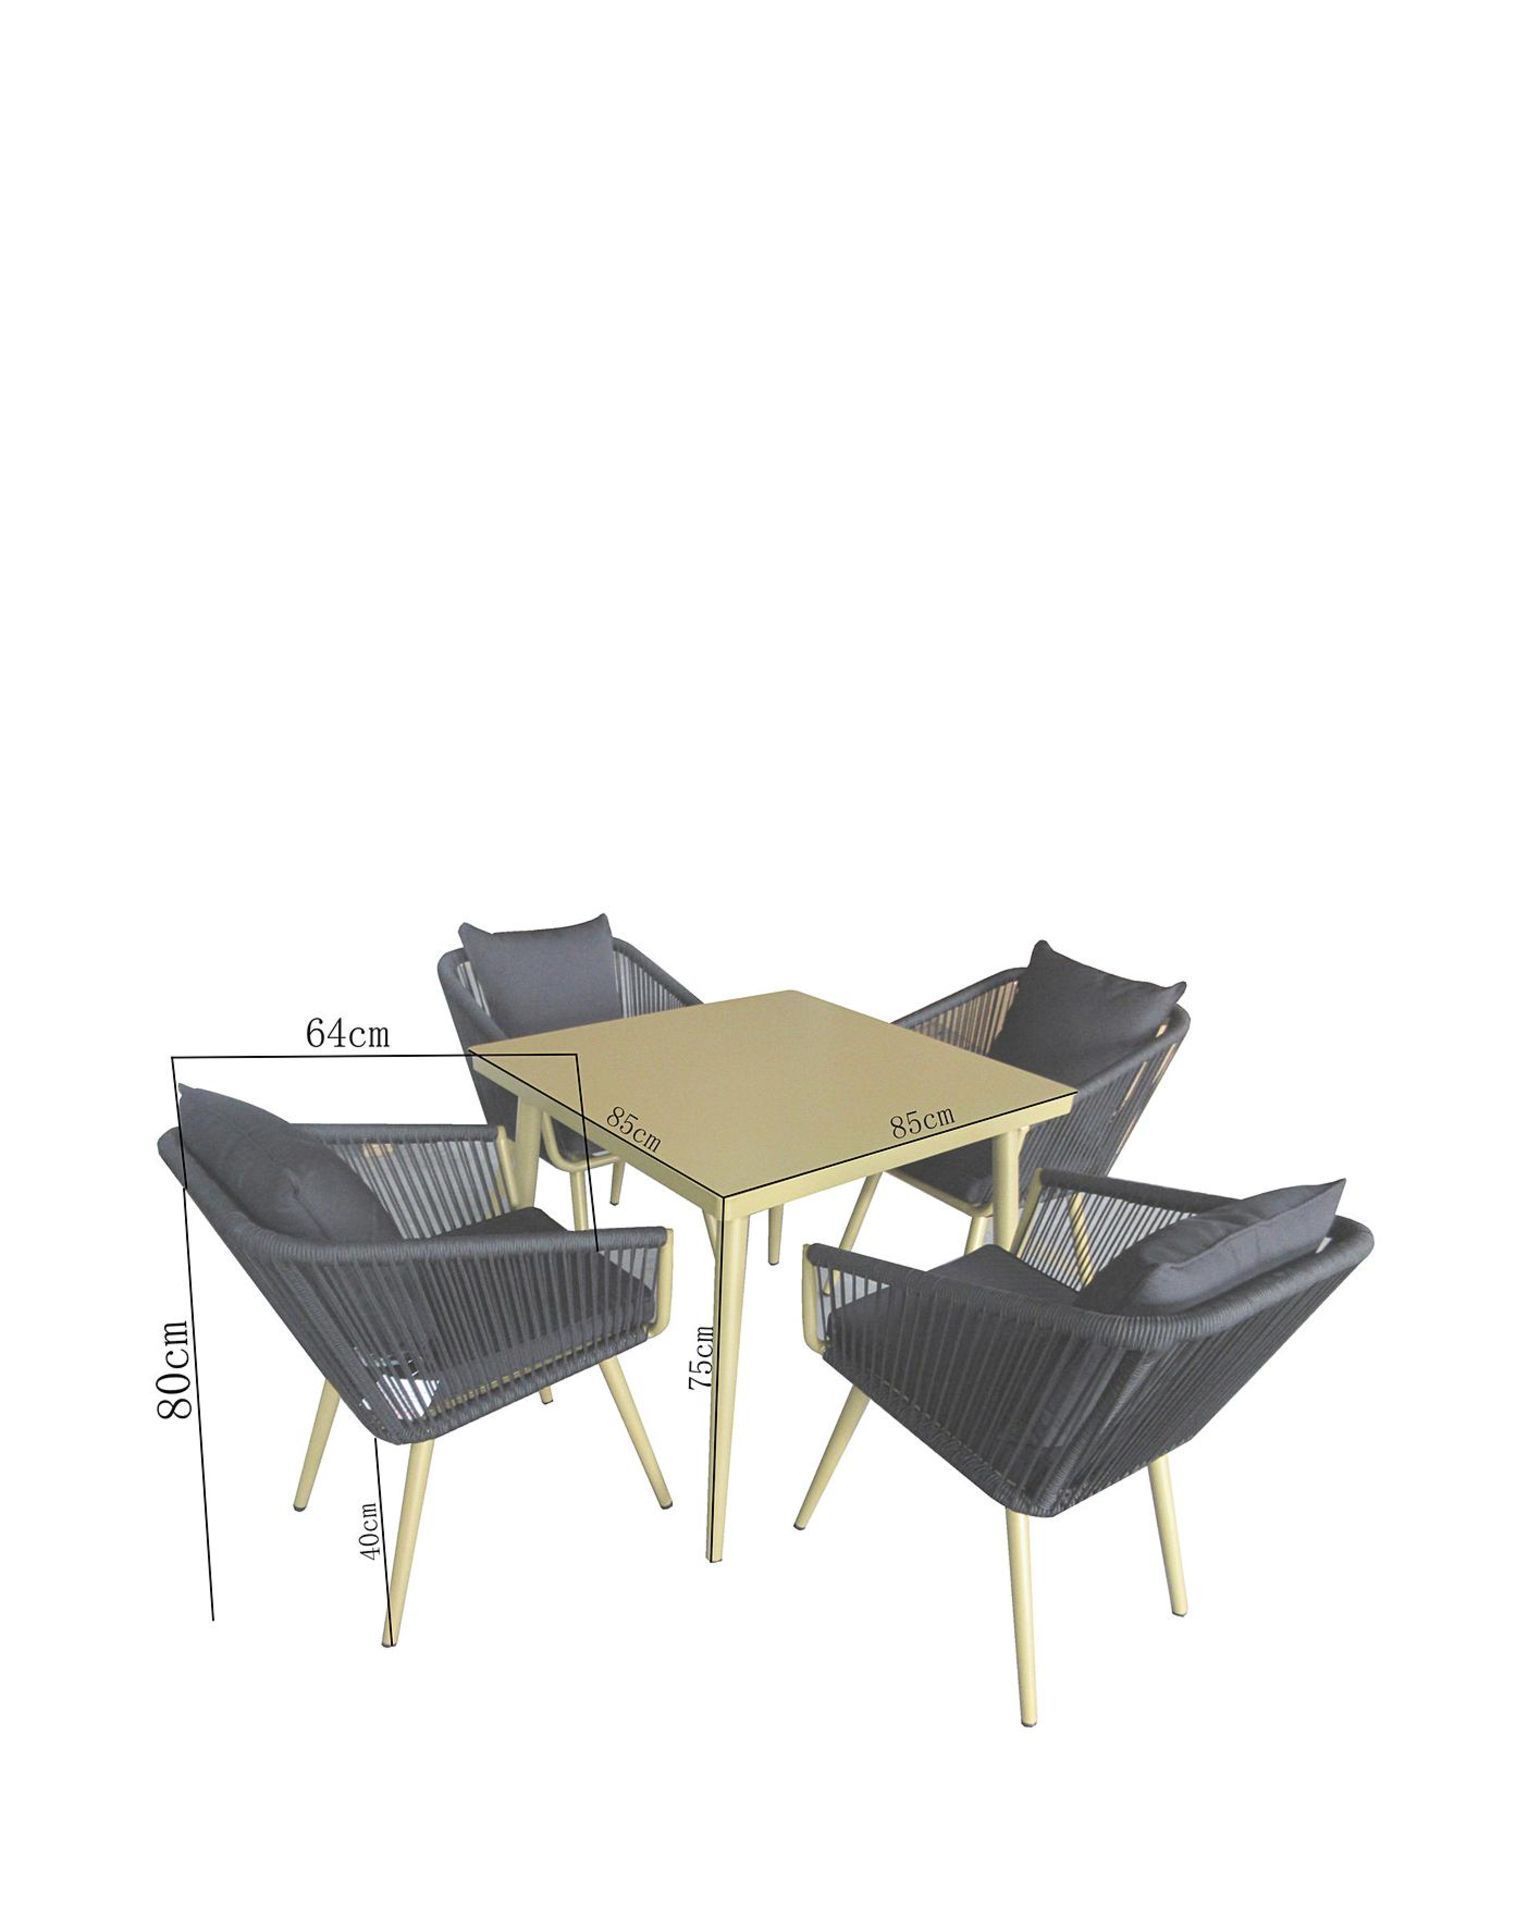 Trade Lot 4 x New & Packaged Joanna Hope Naya 4 Seater Dining Sets. RRP £719 each. This Exclusive - Image 11 of 11